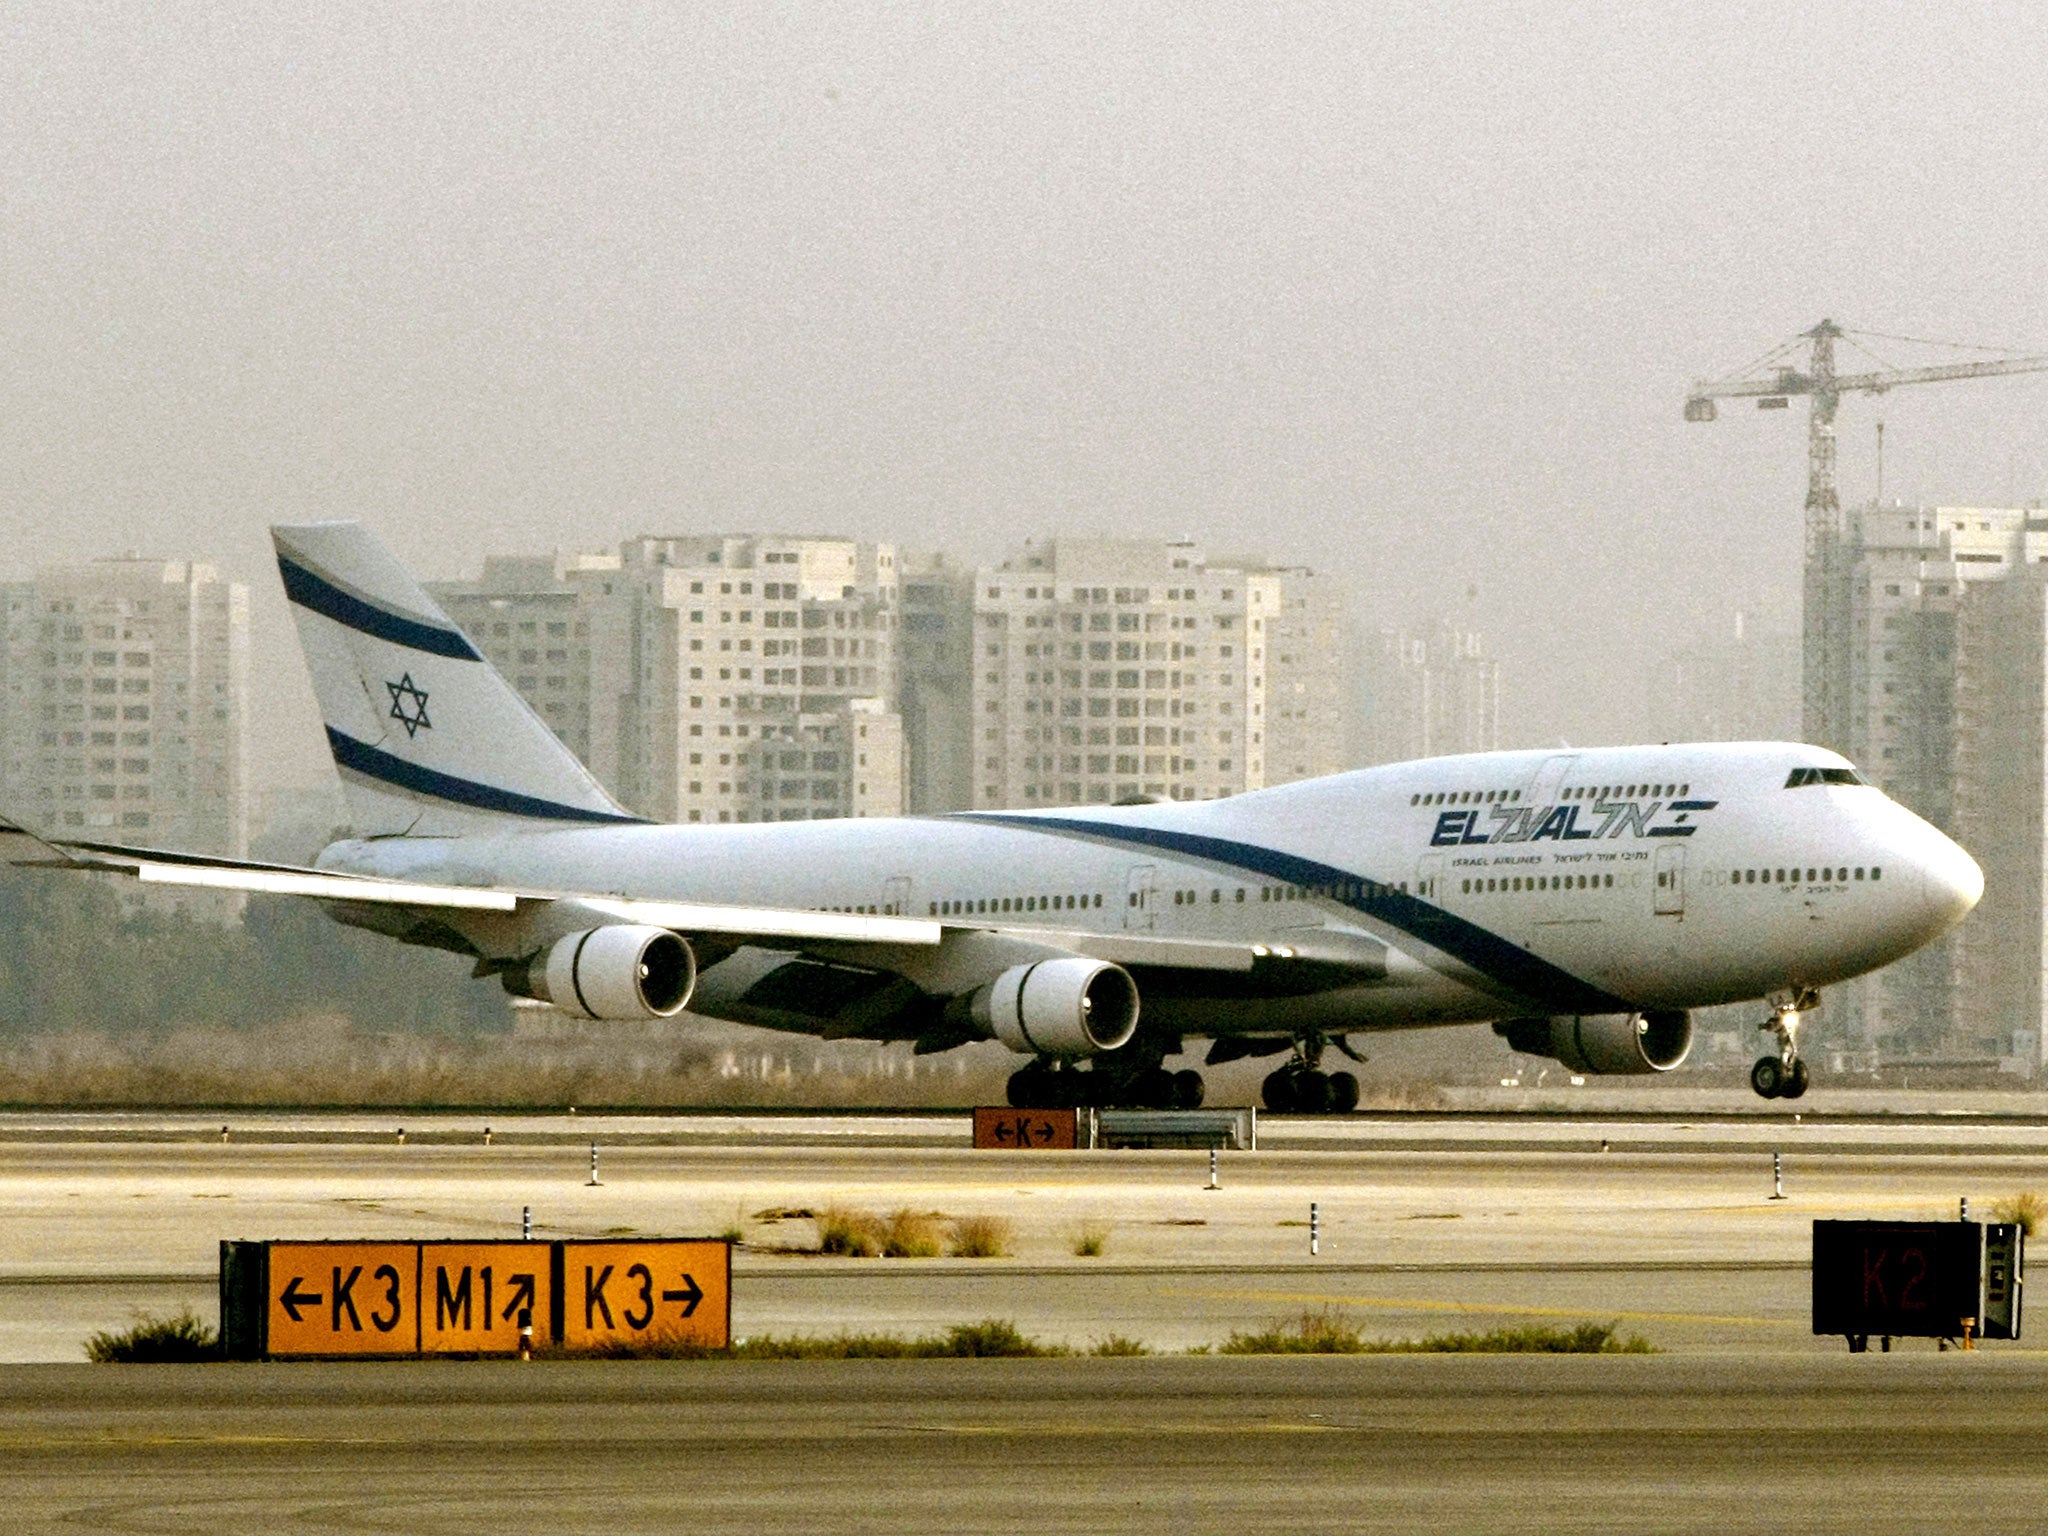 The plane returned to Ben Gurion Airport